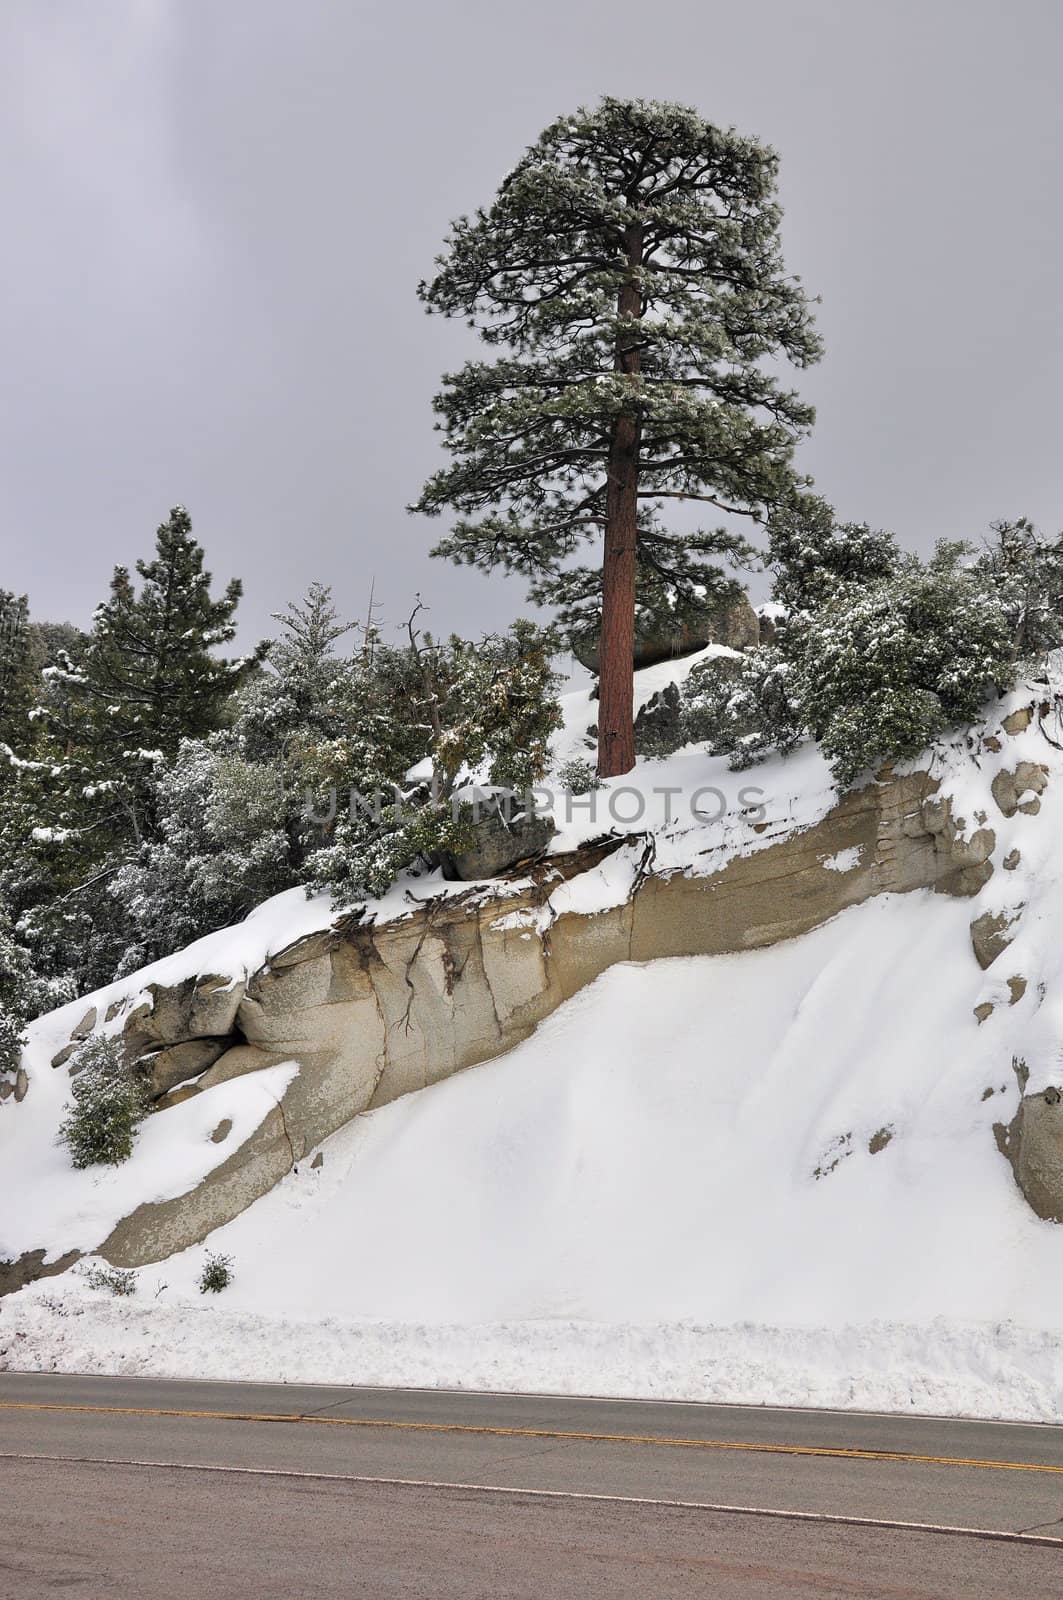 A lone pine tree stands tall on a snowy slope on Mount San Jacinto in Southern California.